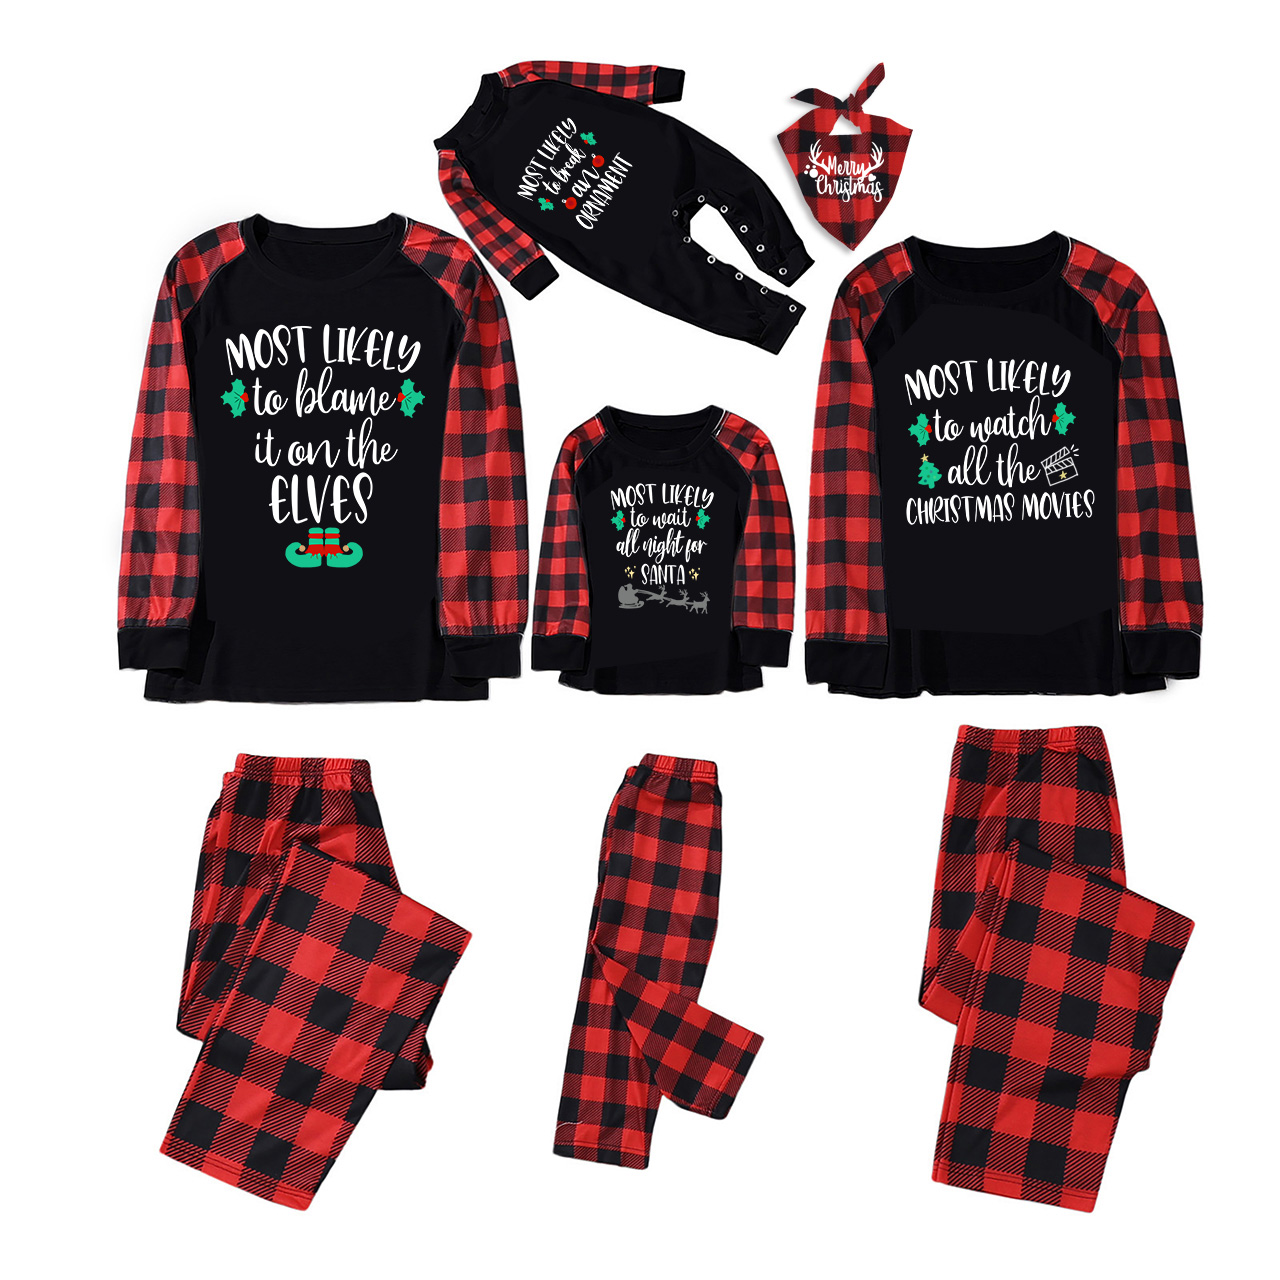 Most Likely to Get Lit Christmas Family Pajamas Sale-Beepumpkin™